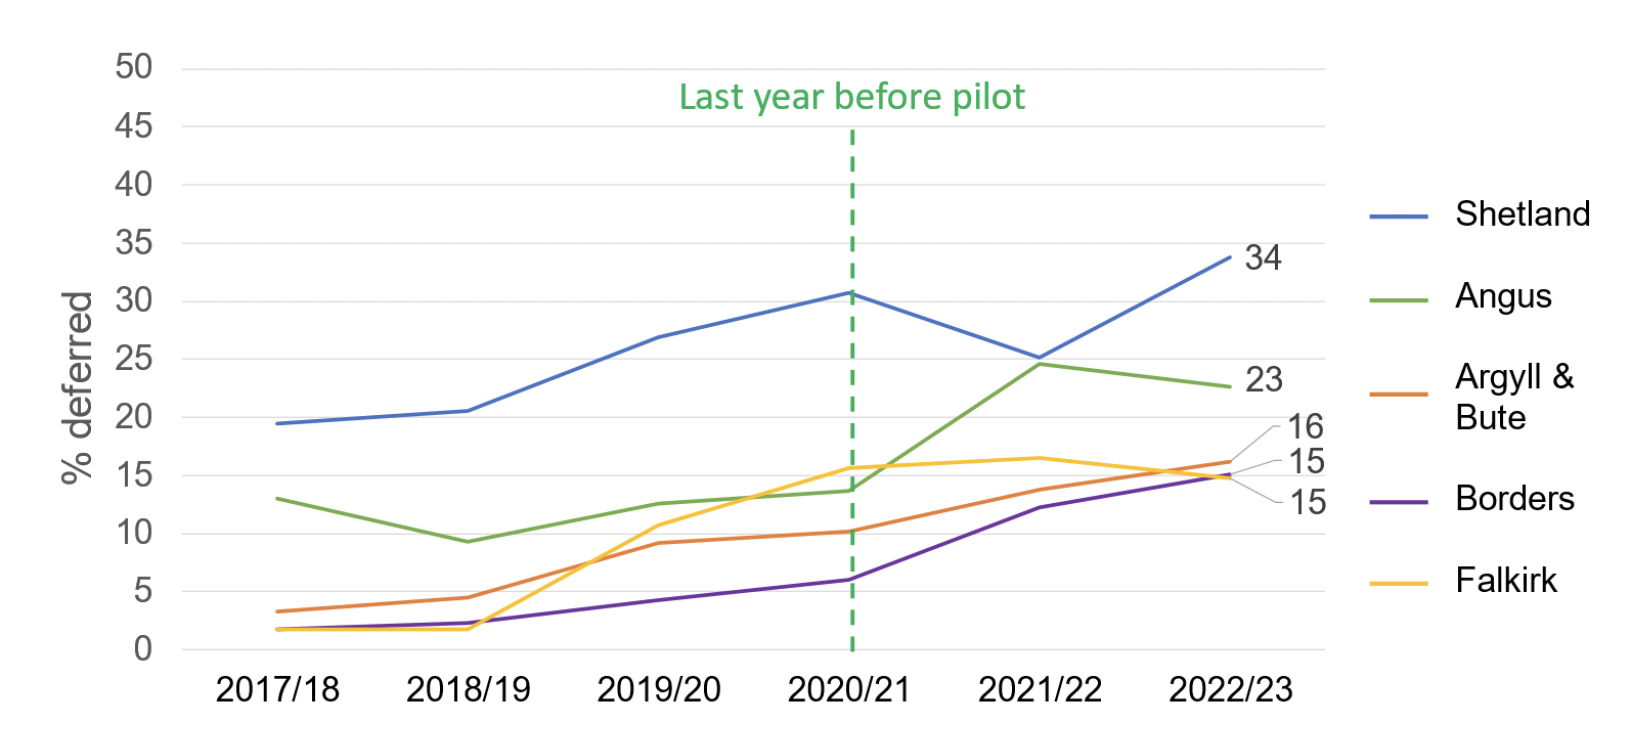 Figure i is a line chart showing August-December deferral rates for 2017/18 to 2022/23. It compares data from Year 1 pilot areas which were Shetland, Angus, Argyll & Bute, Borders, and Falkirk. Overall, it shows some increases in the deferral rate in Year 1 areas since the pilot was implemented in 2020/21.